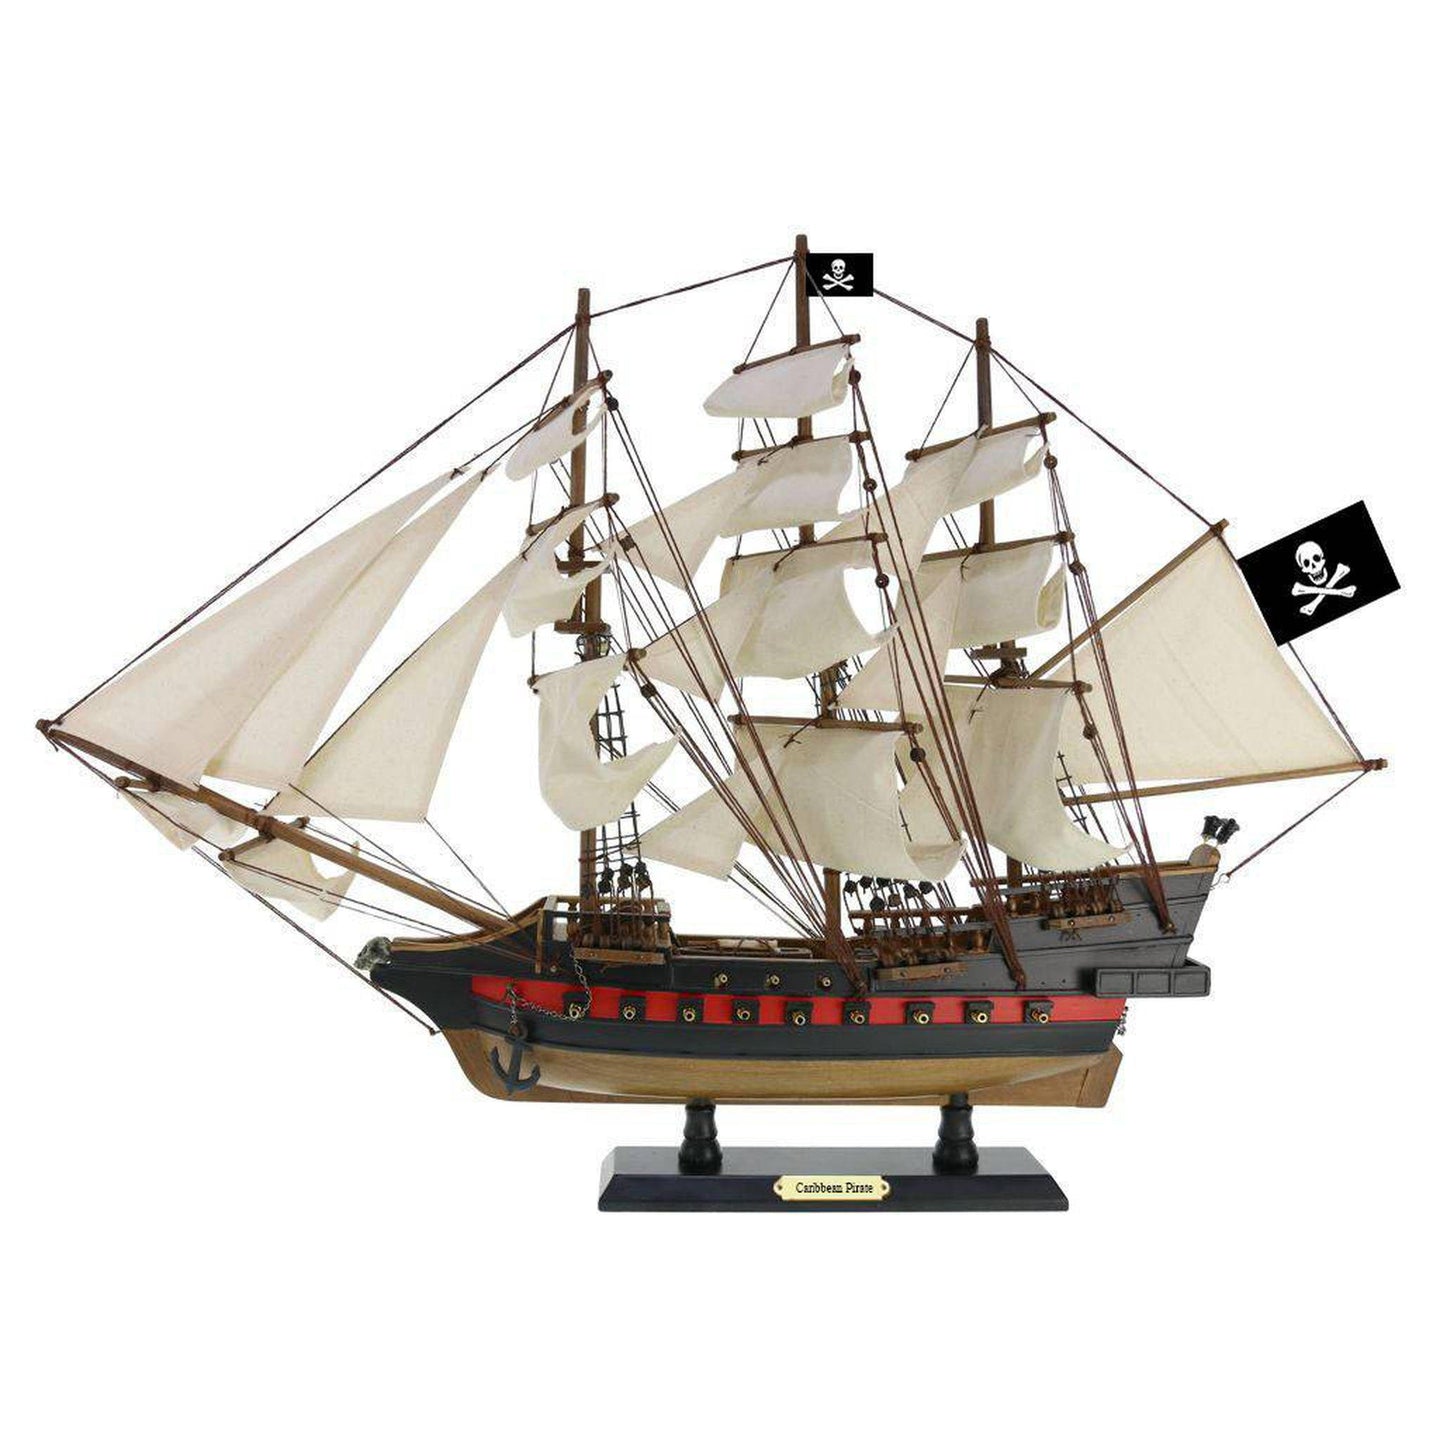 Handcrafted Model Ships Wooden Caribbean Pirate White Sails Limited Model Pirate Ship 26